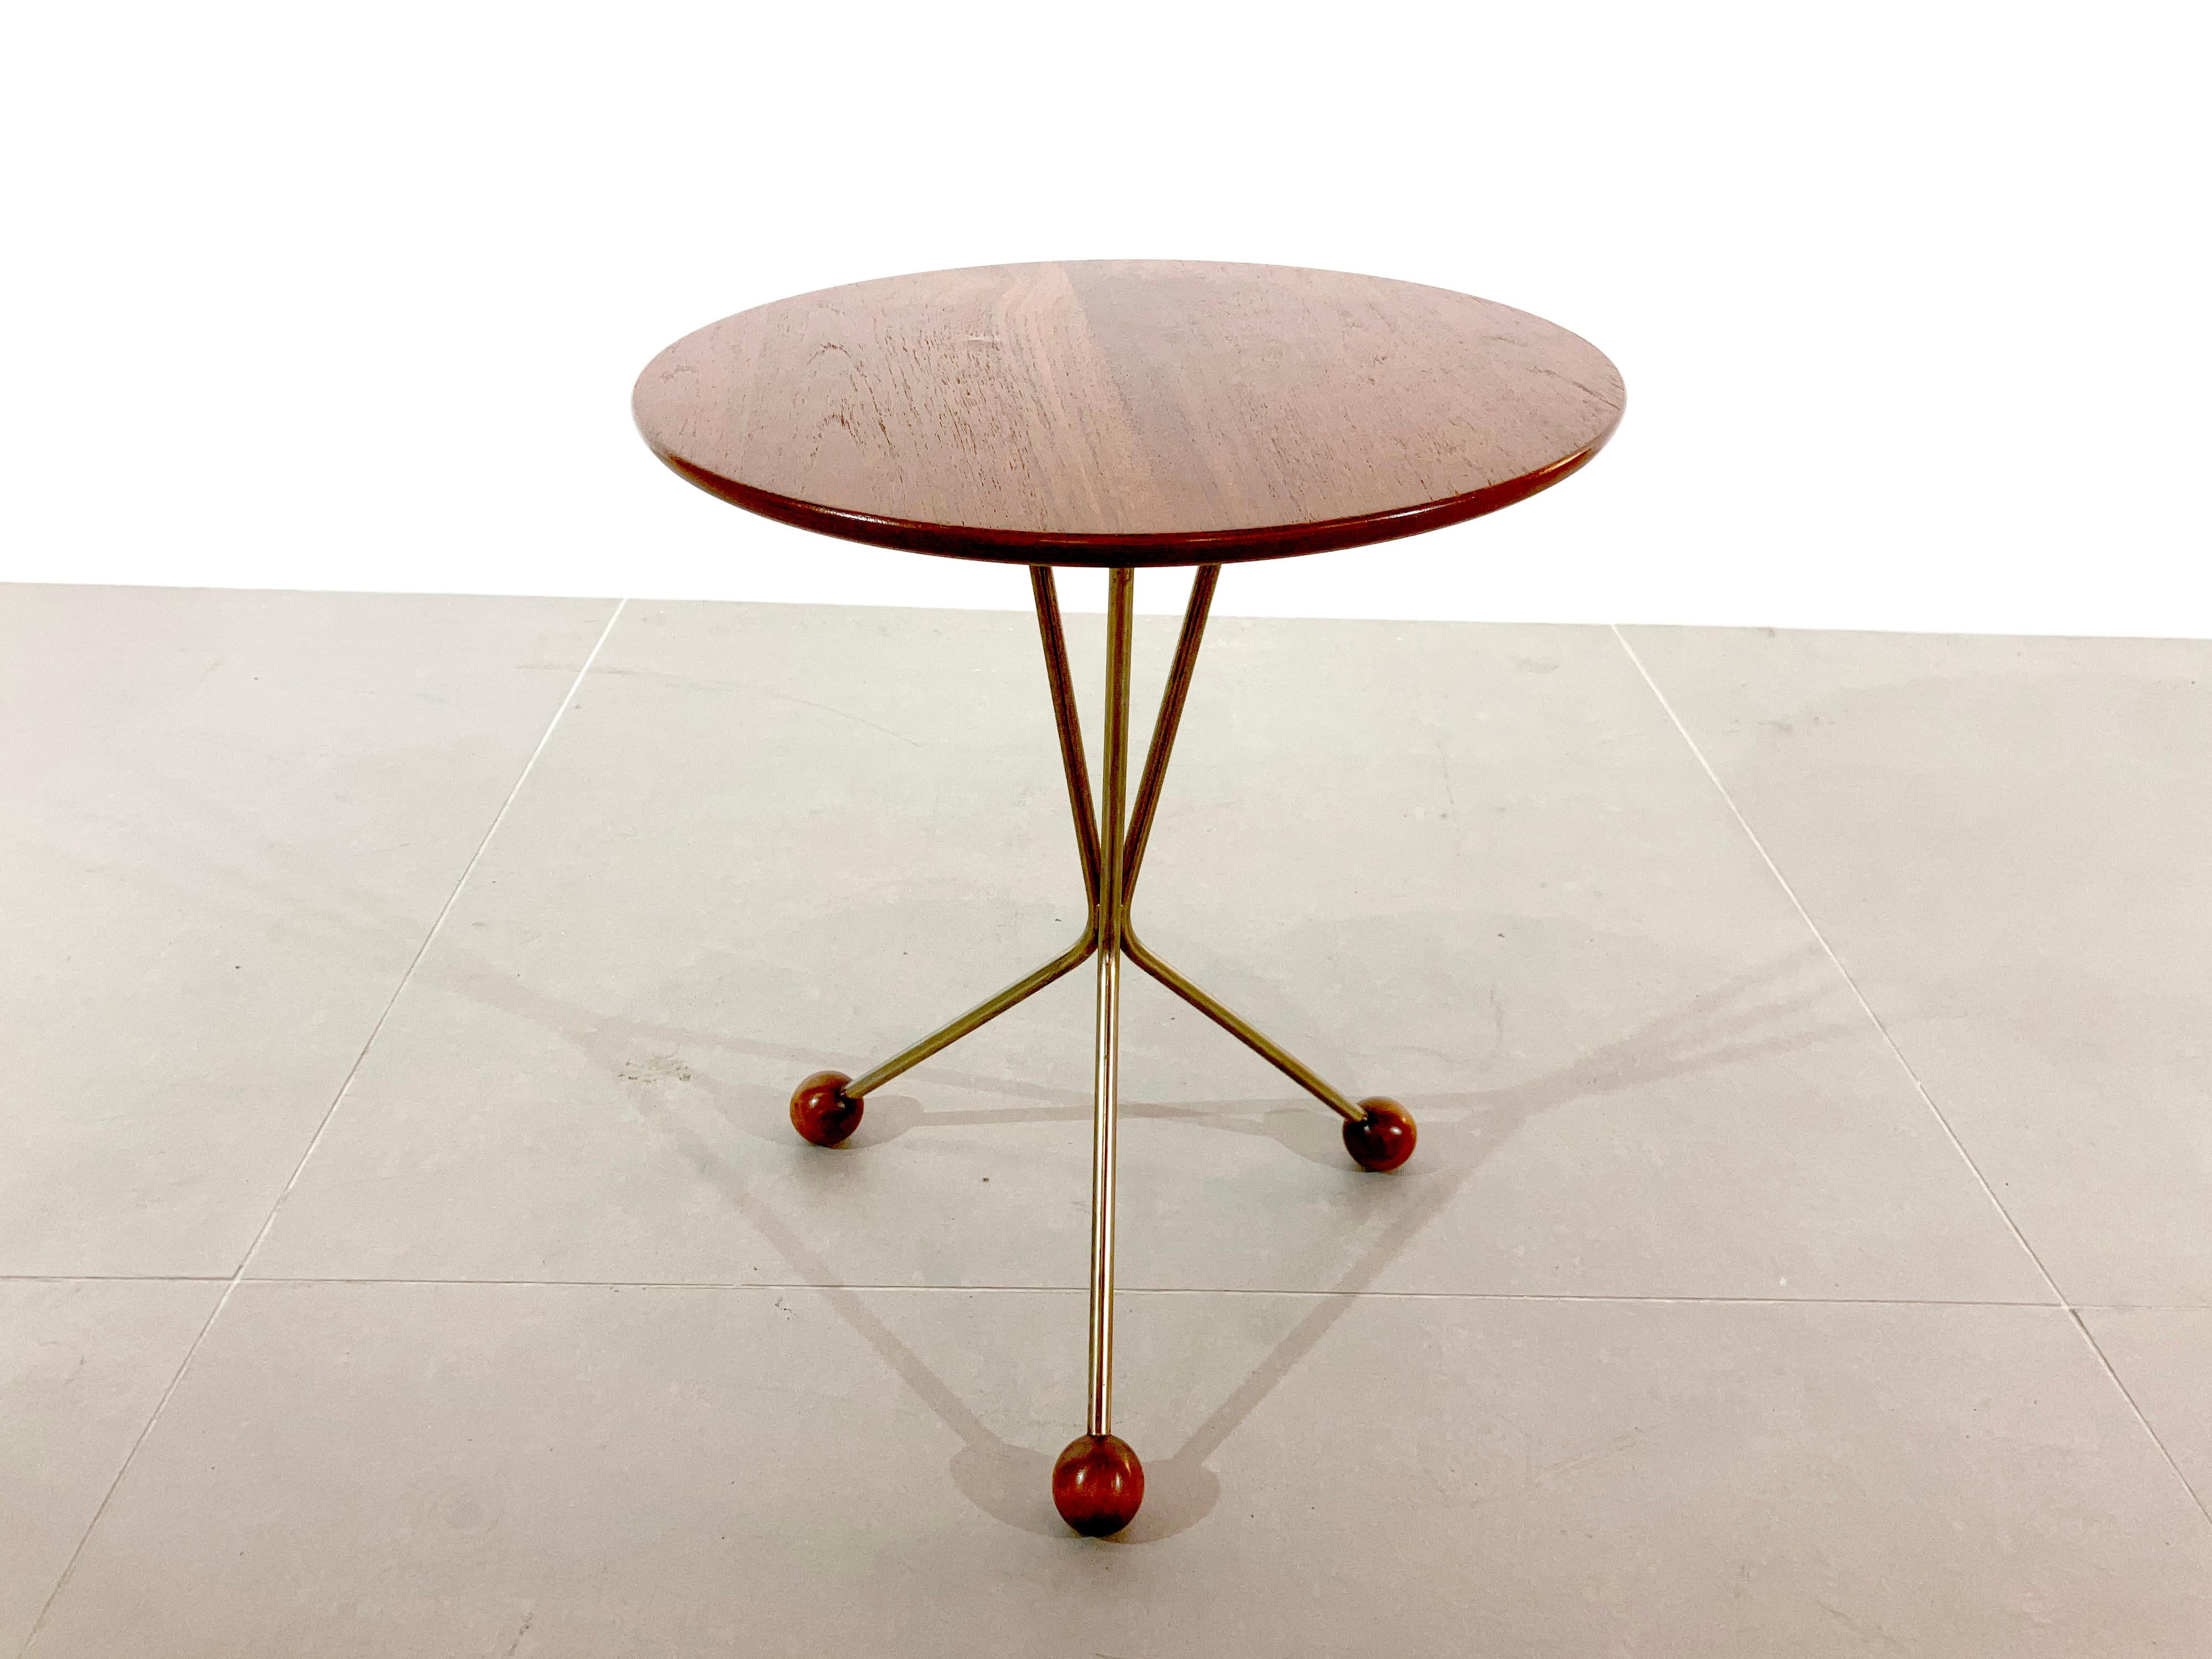 A charming Little three legged circular teak wood topped occasional table, 
the top is sat on a chrome base featuring ball feet. 
This rare little side table is model 'Bord pa Burk' by Alberts in Tibro Sweden, 1950s. 

